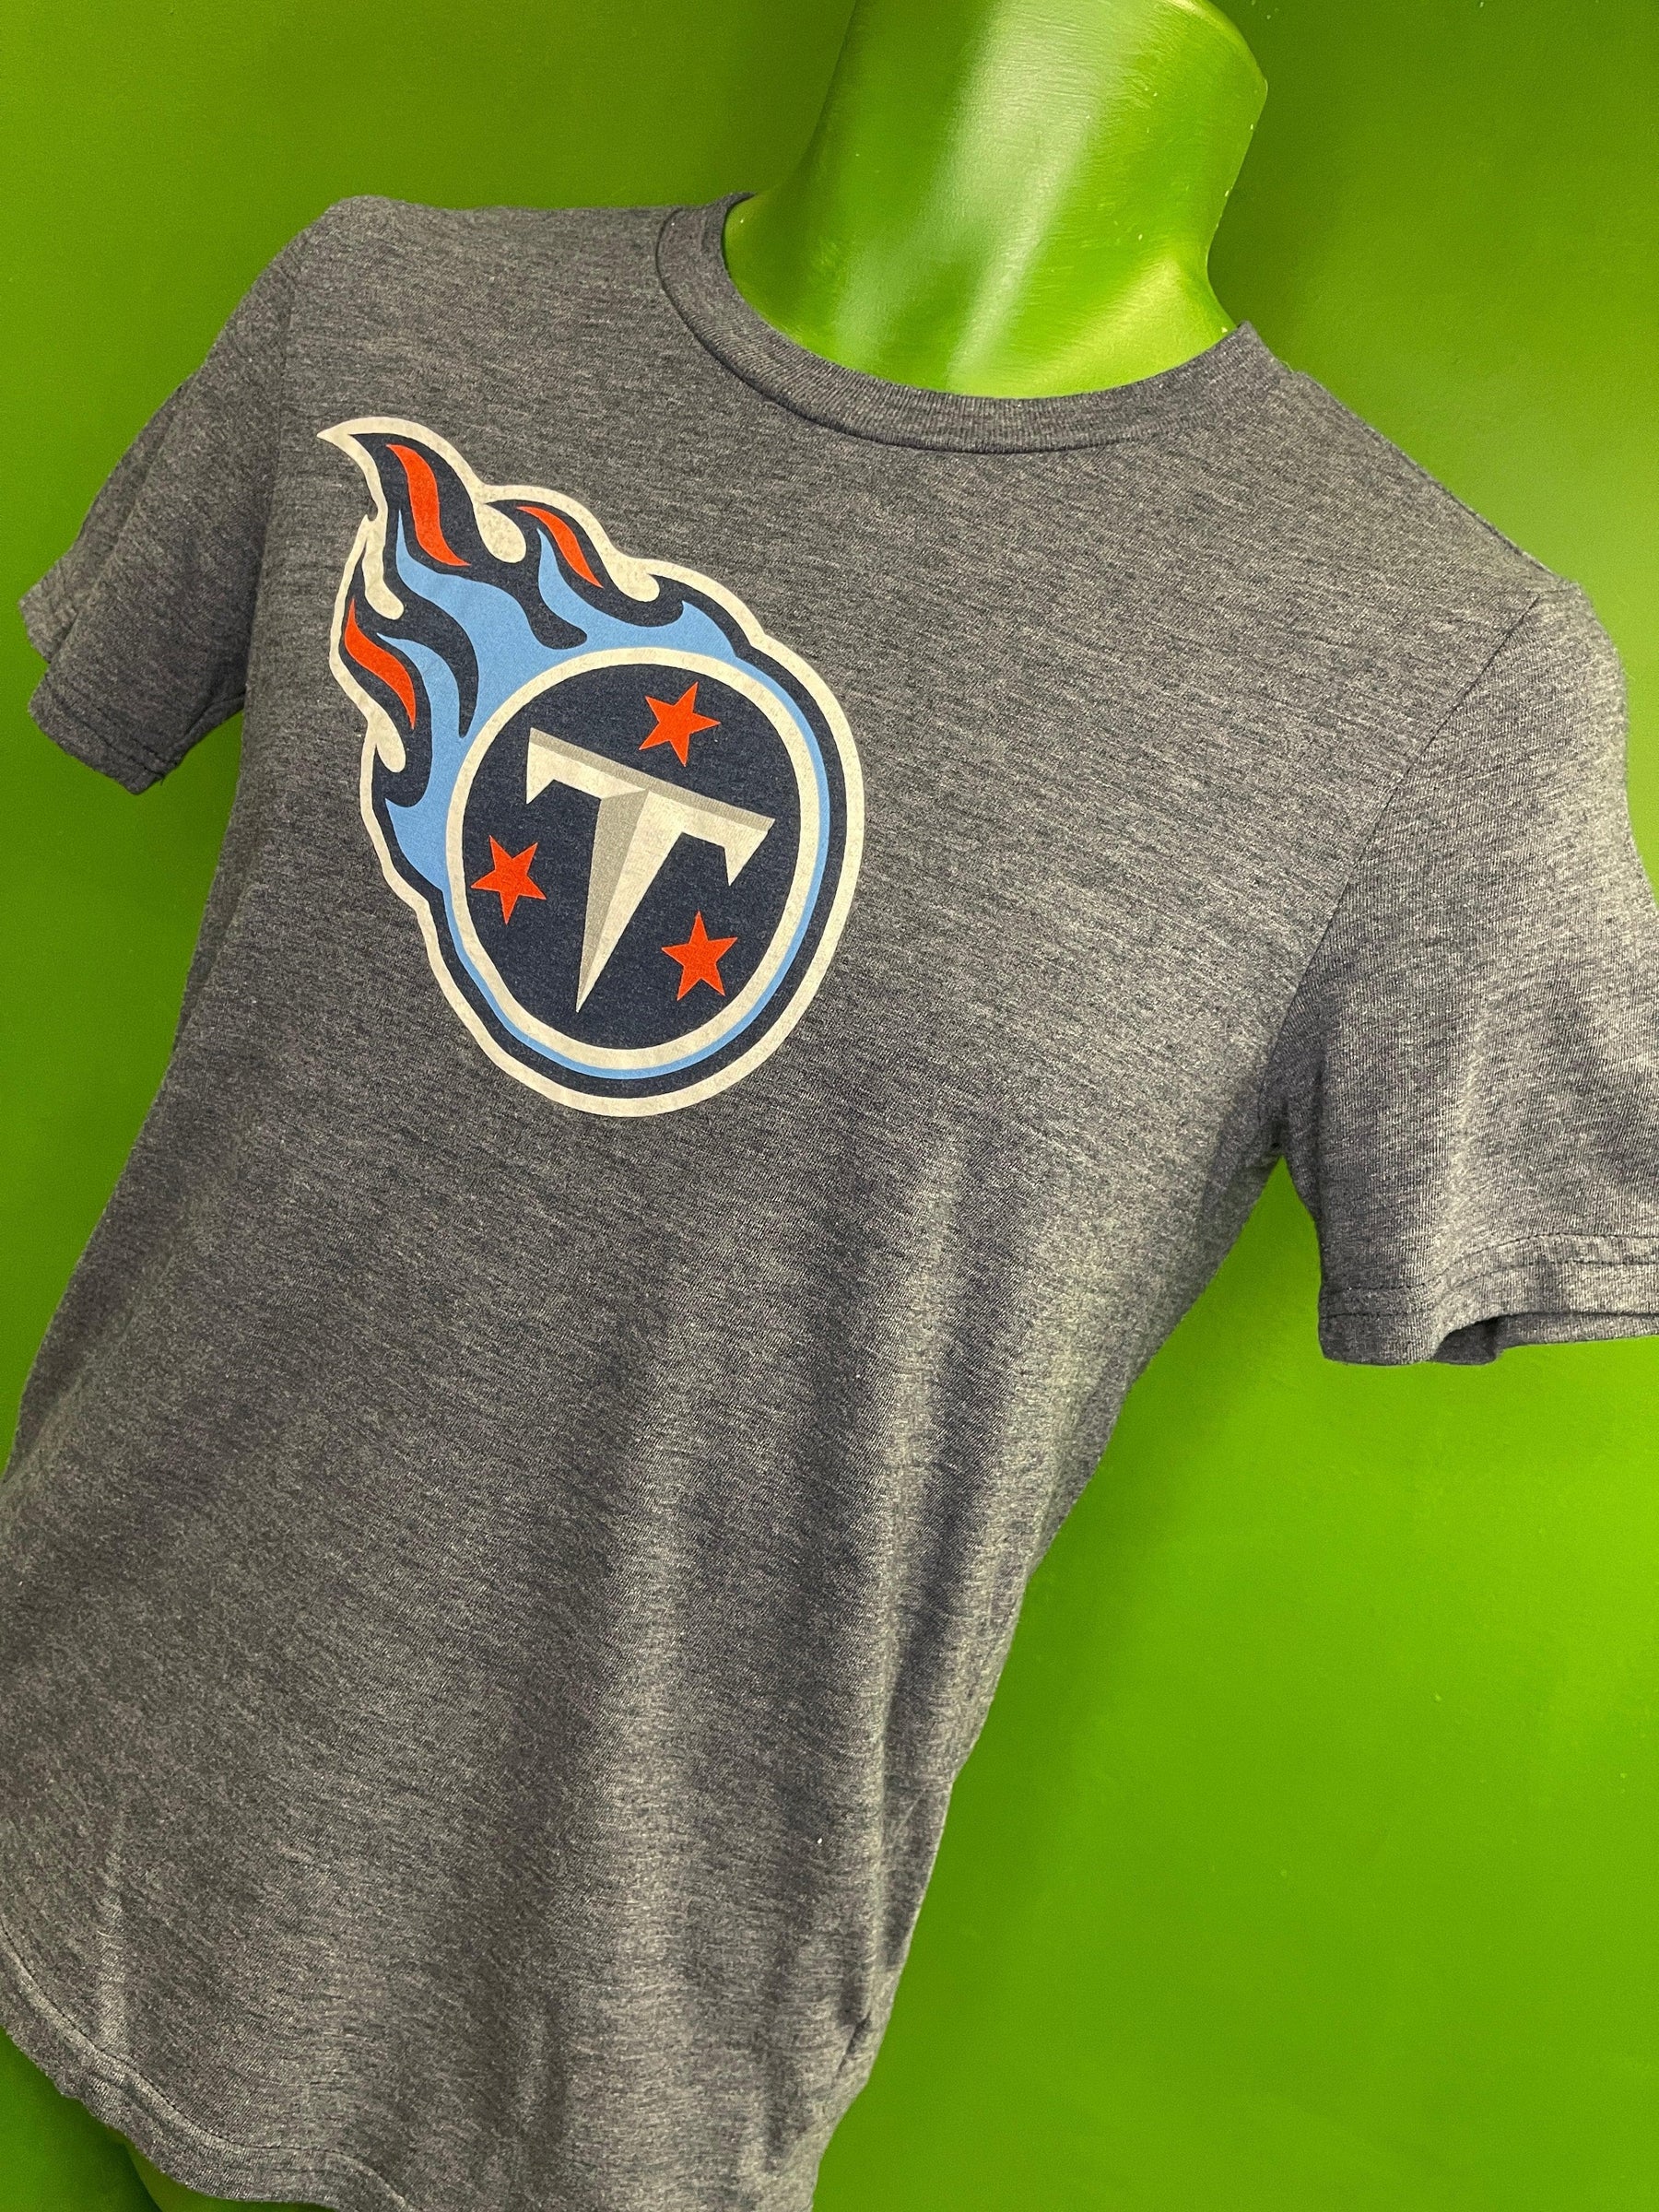 NFL Tennessee Titans Heathered Blue T-Shirt Youth Medium 10-12